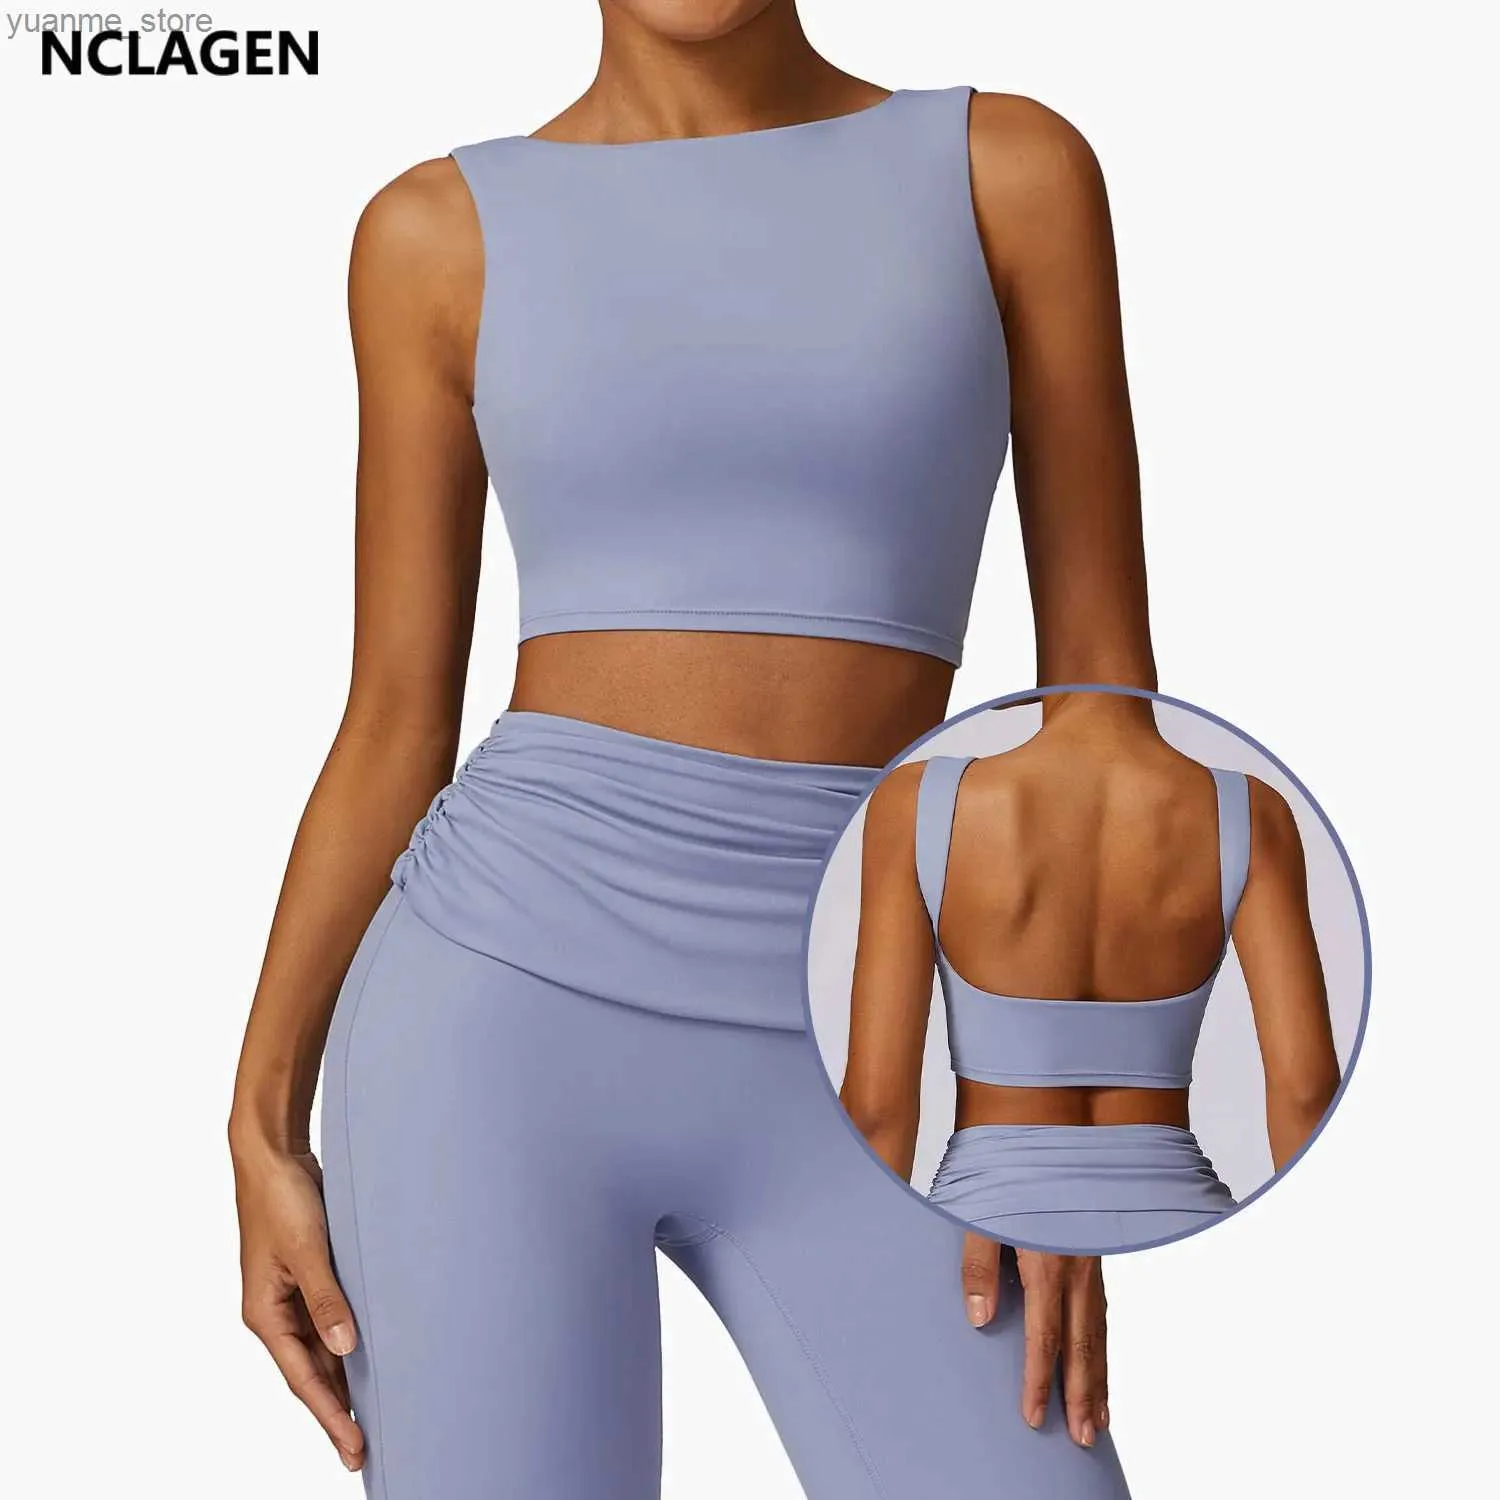 Yoga Tenues Nclagen Running Sports Bra Femmes High Support Impact Open Back Yoga Breathable Slim Fit Fitness Top Top avec des coussinets amovibles Y240410